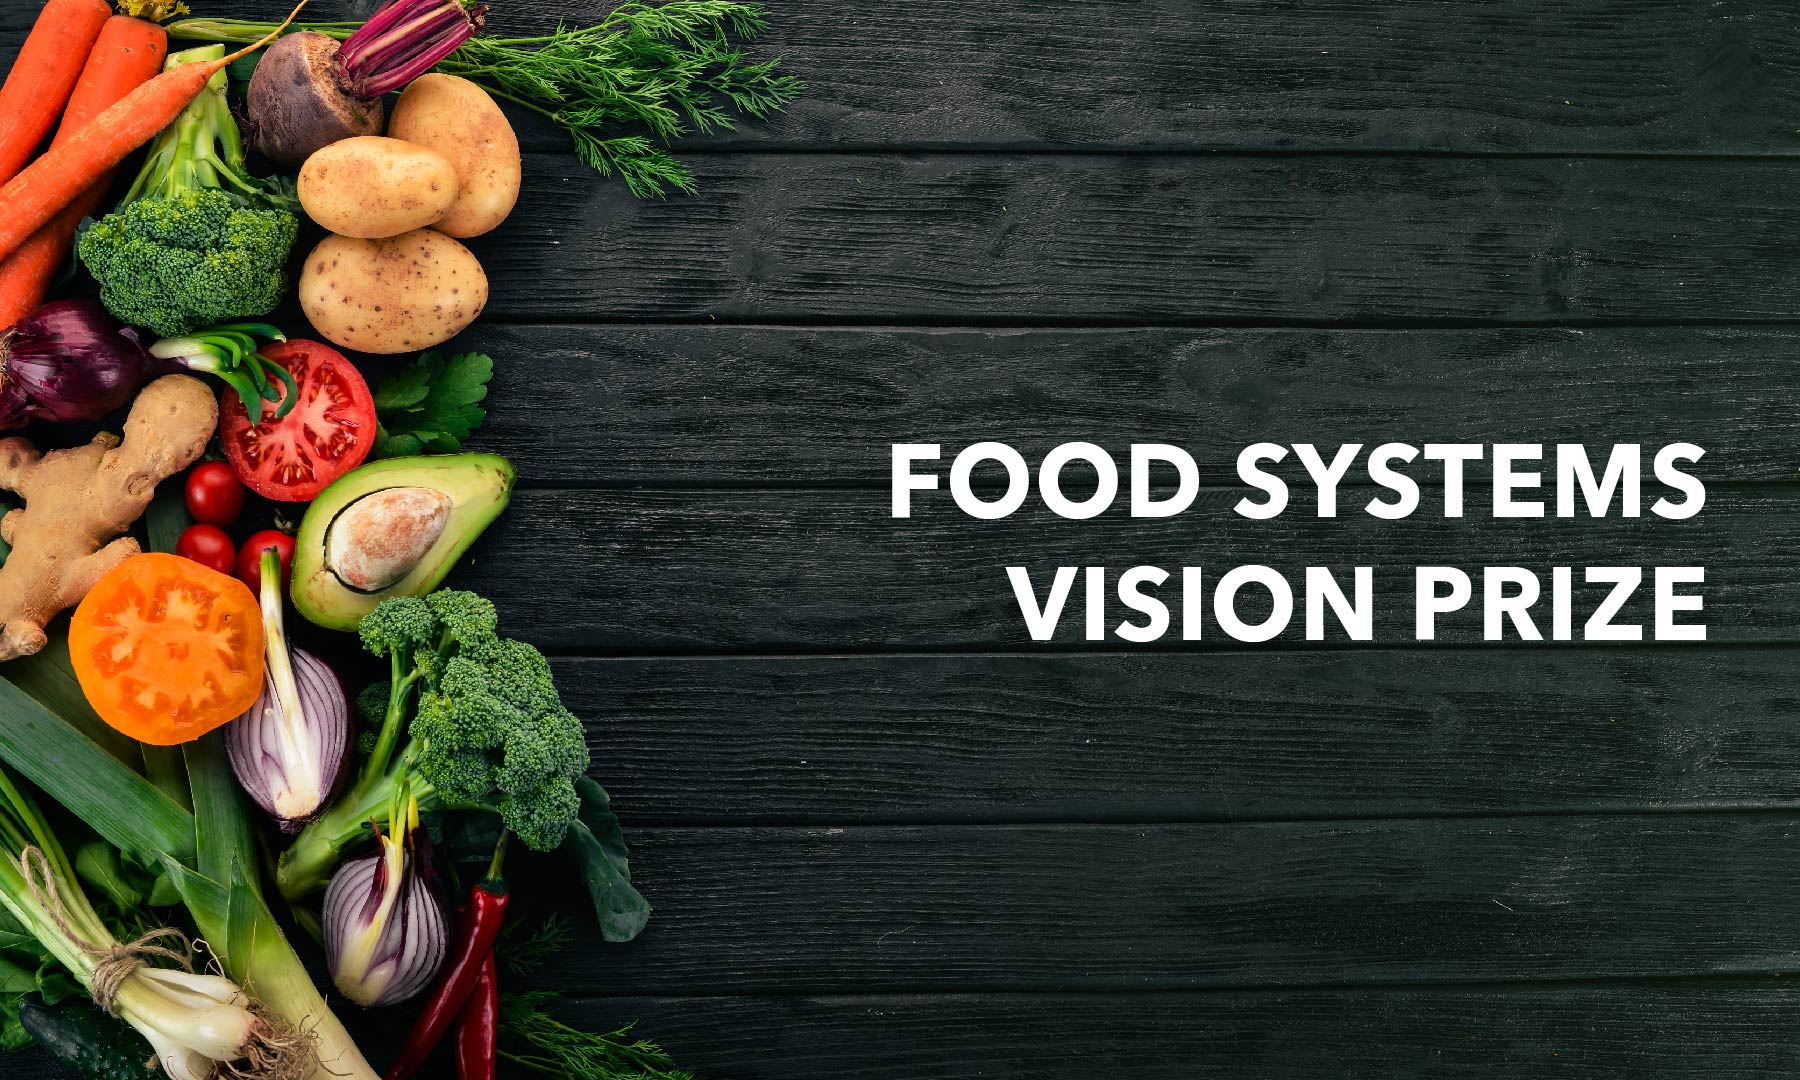 APHRC Was among ten finalists of the Rockefeller Foundation Food Systems Vision Prize